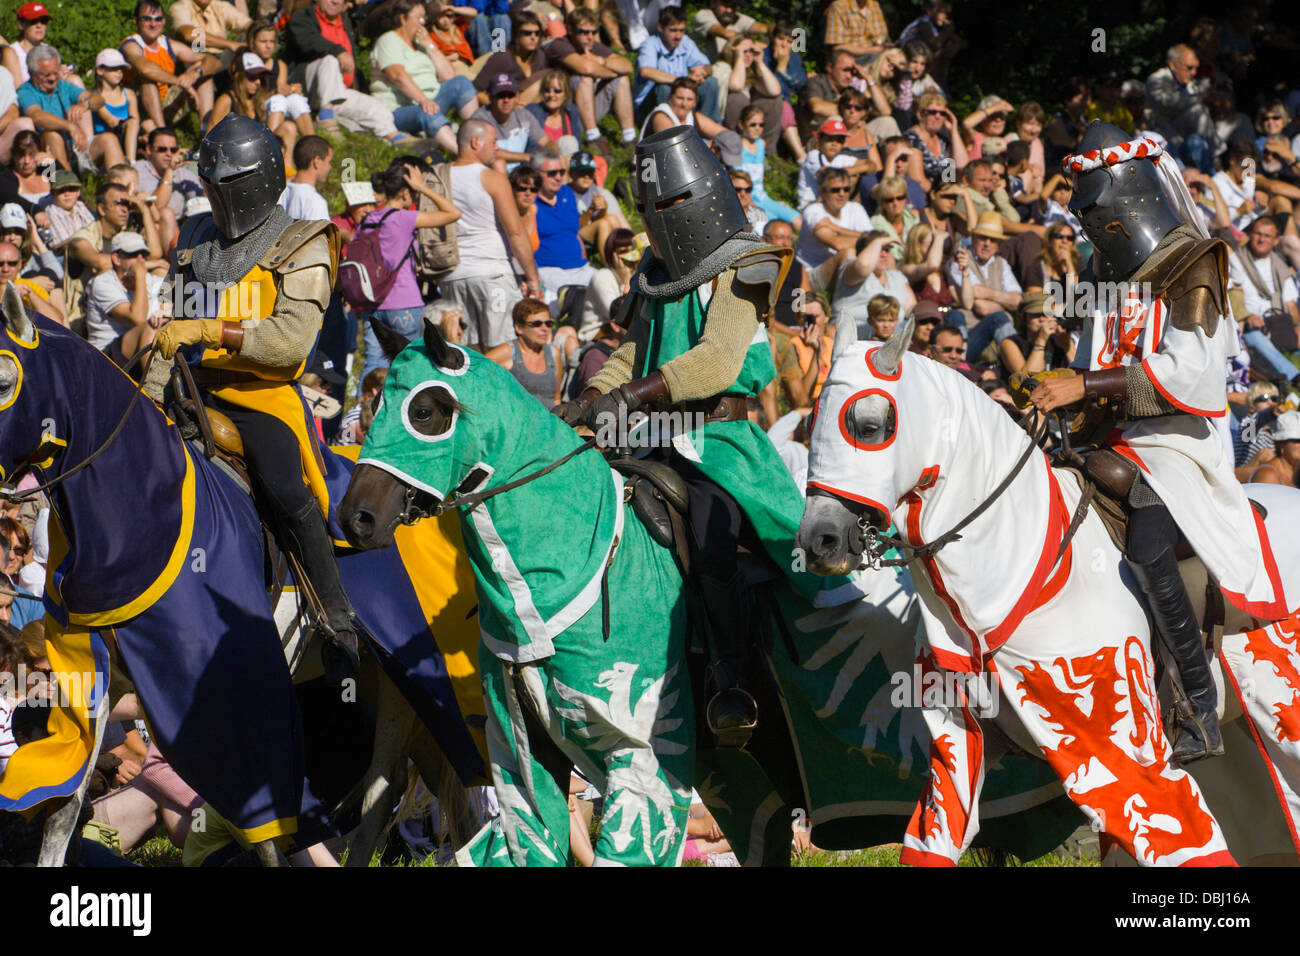 Knights in armour on horseback at French Mediaeval Fayre Stock Photo